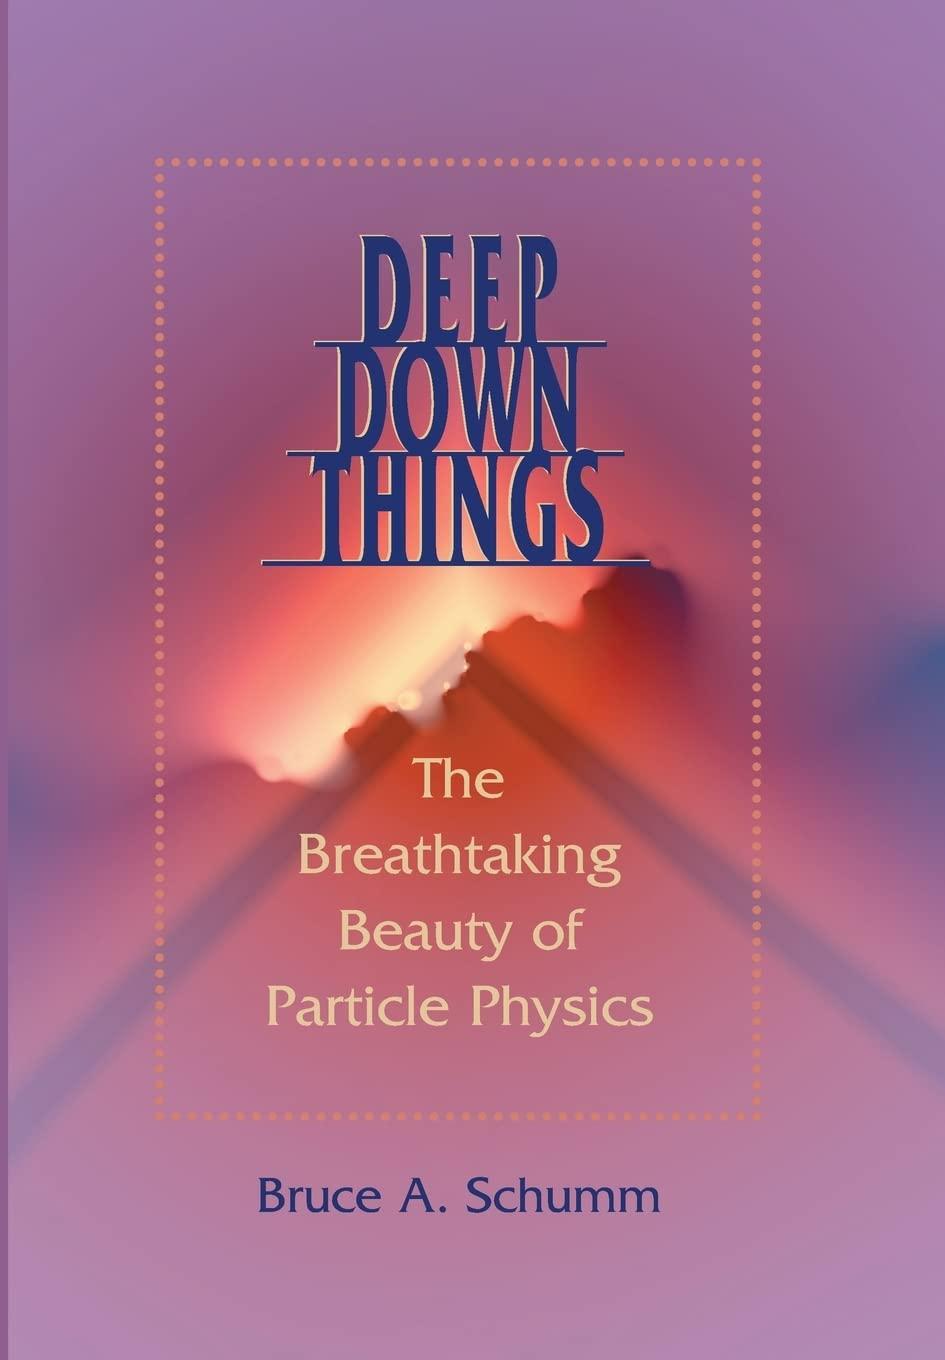 deep down things the breathtaking beauty of particle physics 1st edition bruce a. schumm 080187971x,